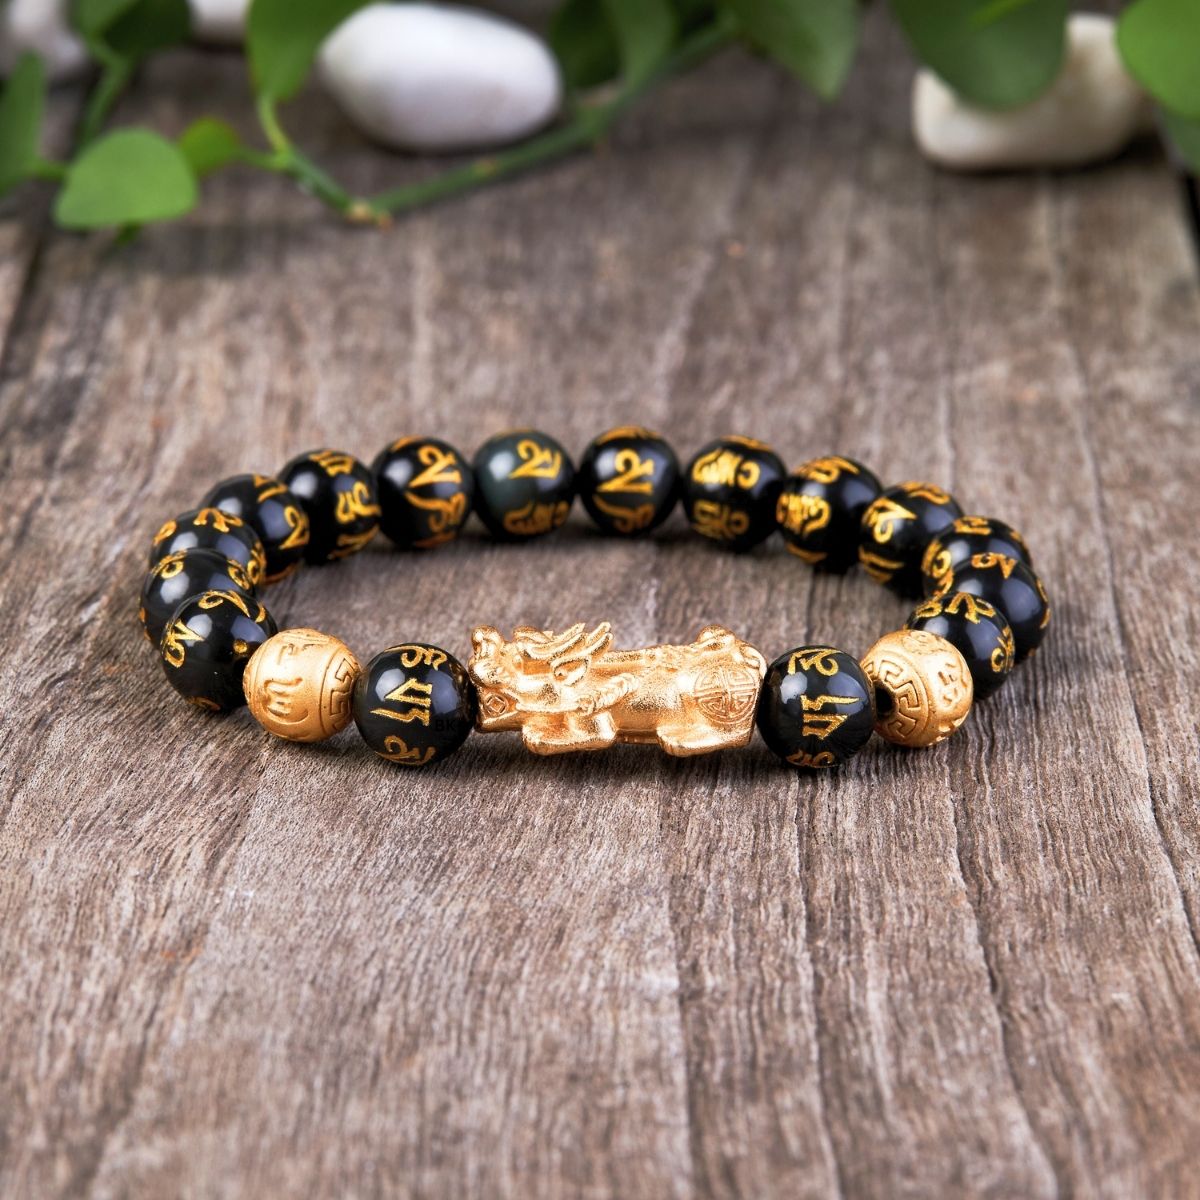 Buytra Feng Shui Pixiu Bracelet Black Obsidian Beads Attract Wealth Good  Luck Wishes - Walmart.com